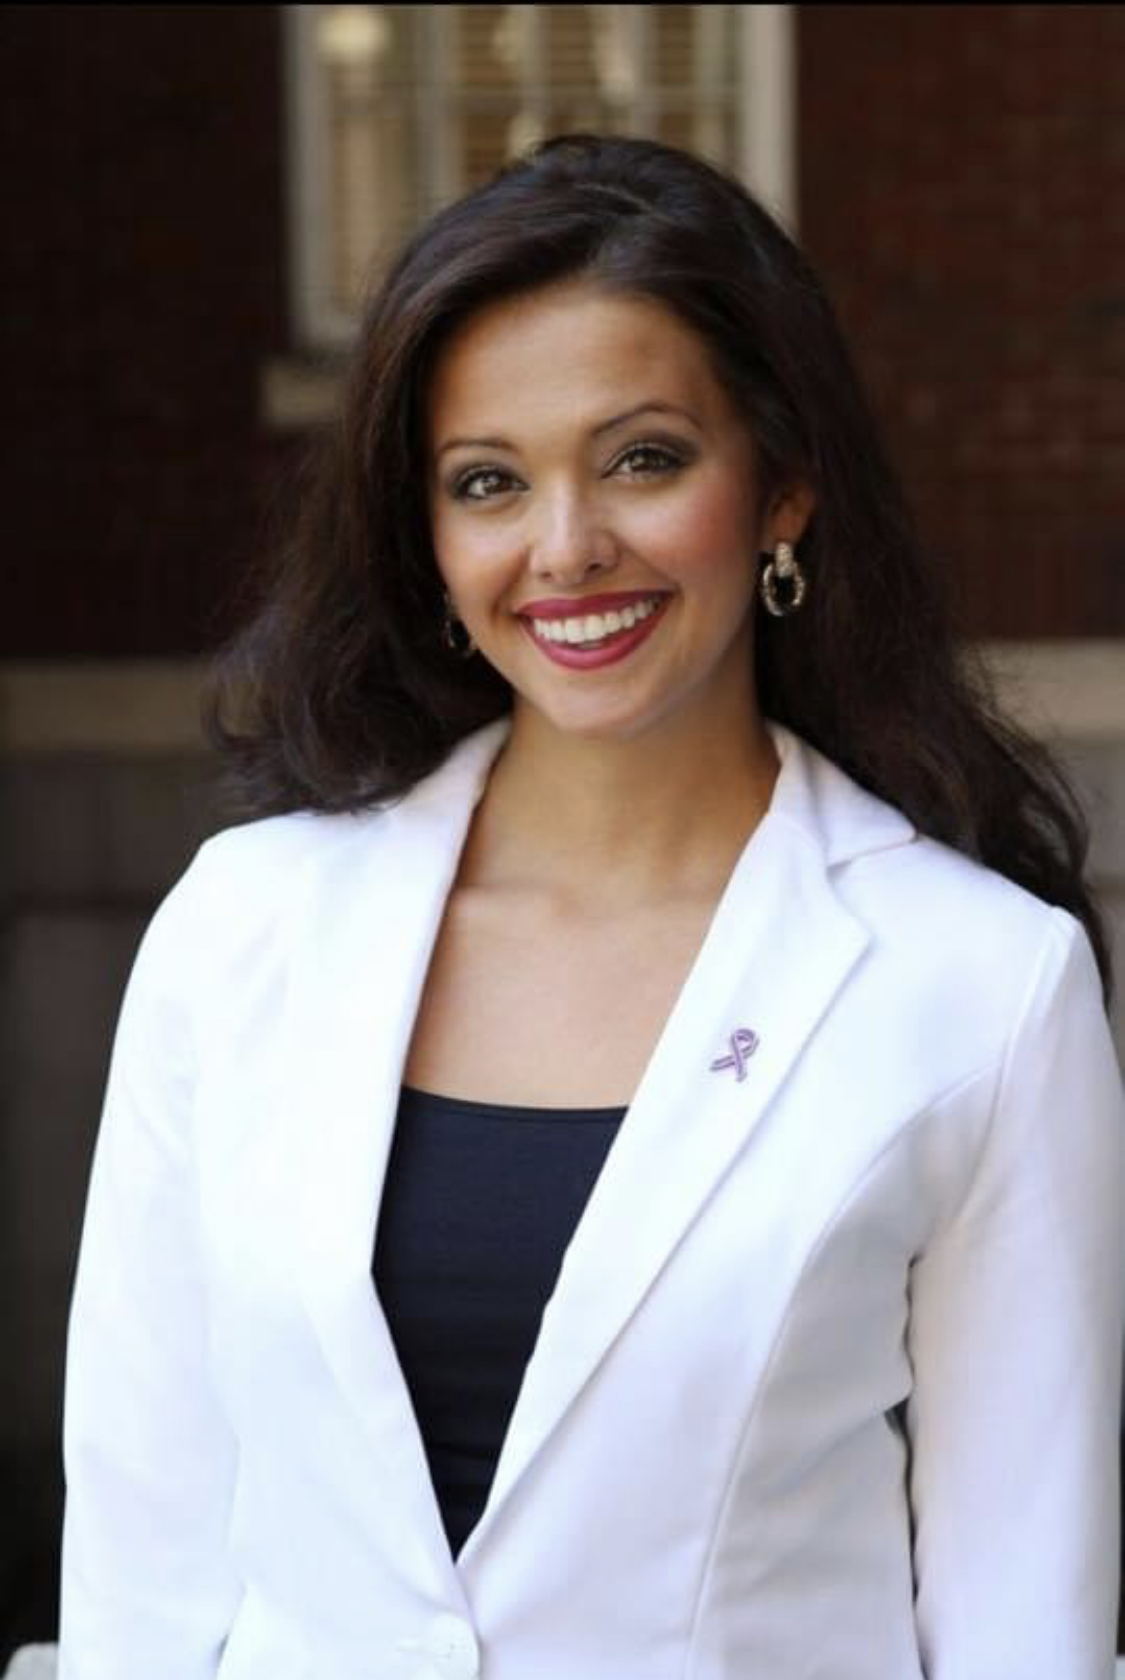 A headshot of Chandler Mordecai. She wears and black blouse with a white blazer, and is smiling broadly.